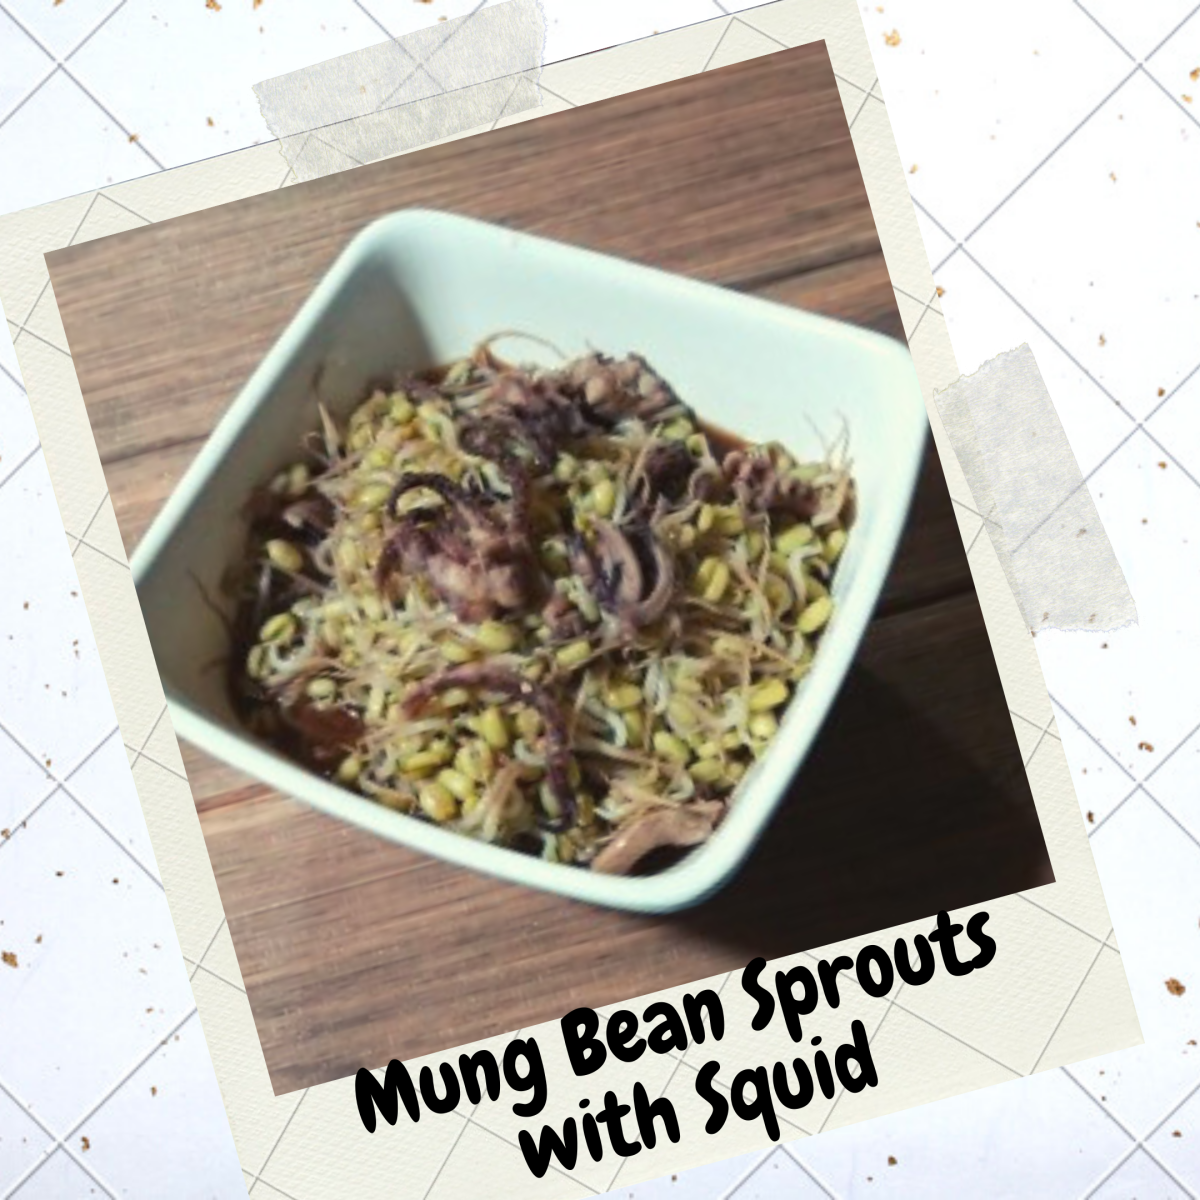 Learn how to prepare mung bean sprouts with squid.